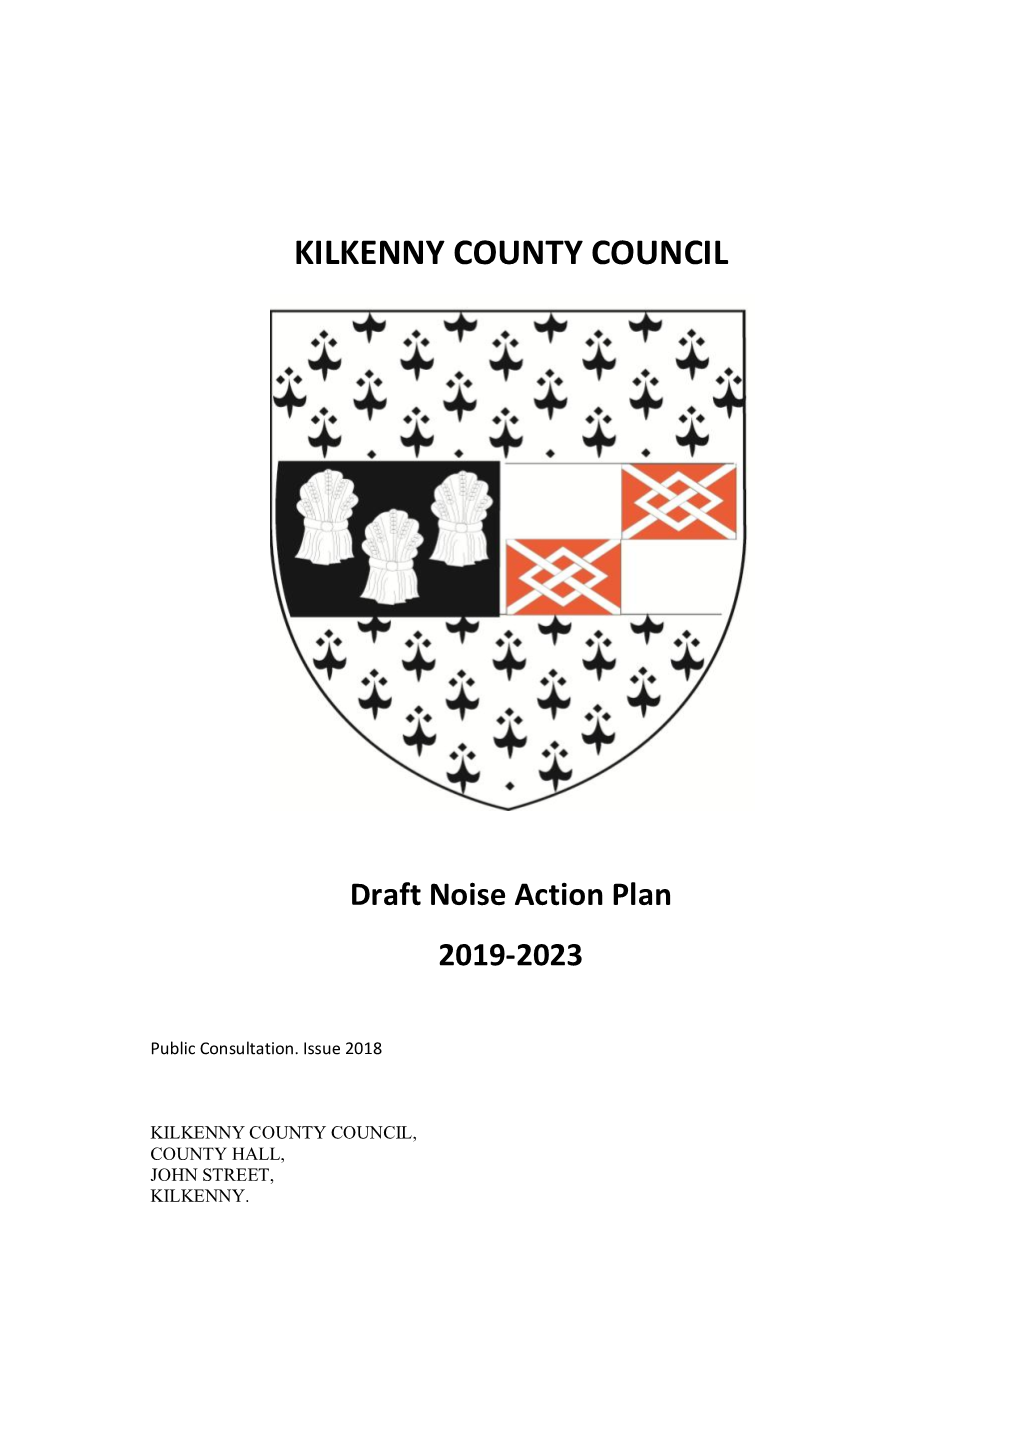 KILKENNY COUNTY COUNCIL Draft Noise Action Plan 2019-2023